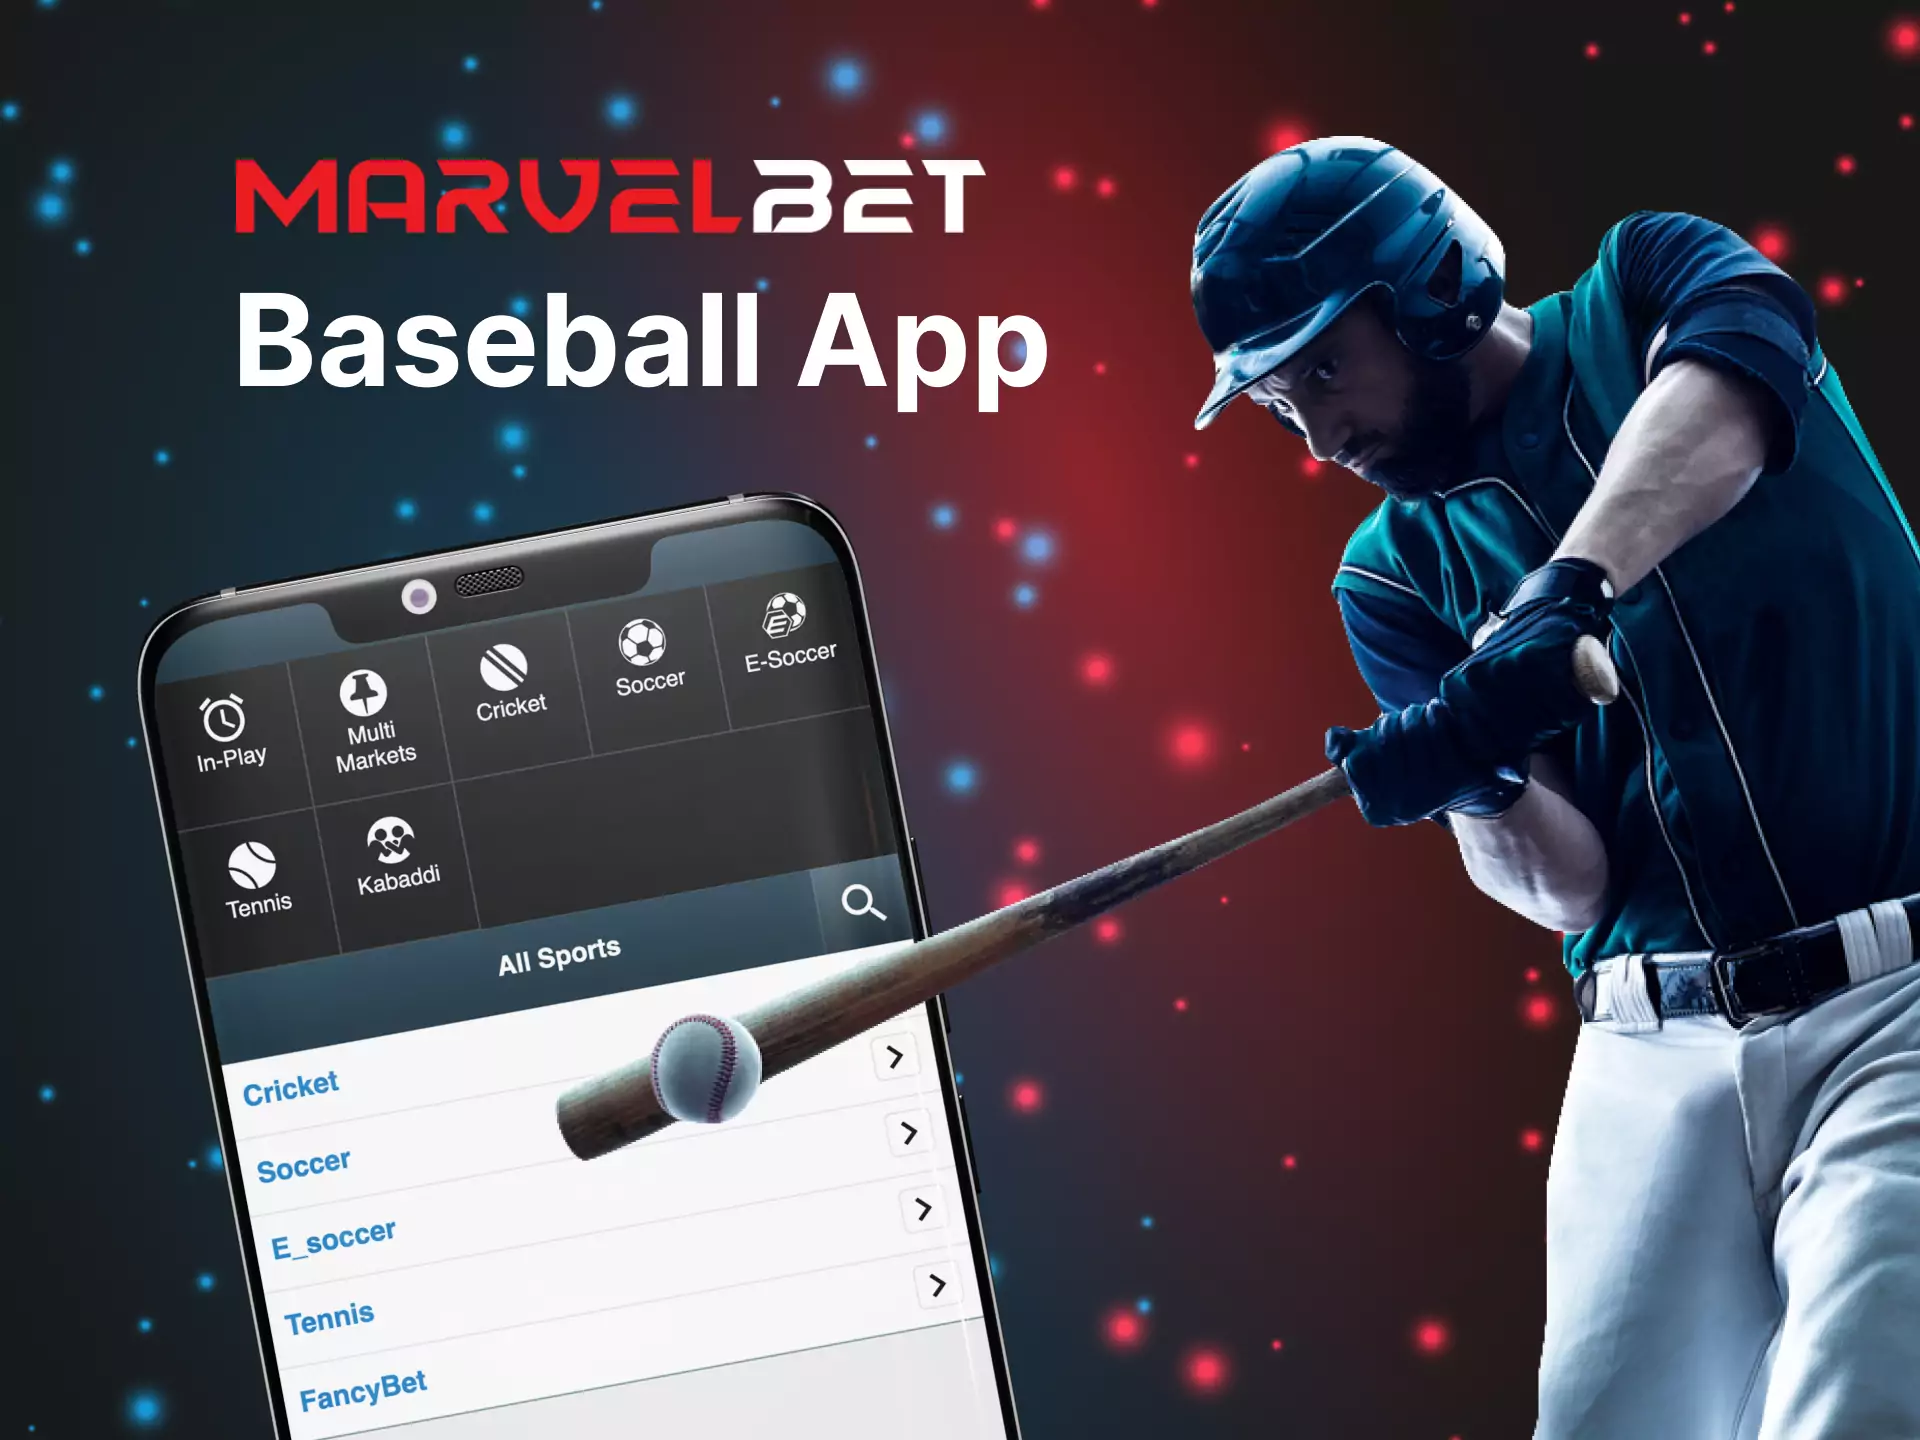 In Marvelbet's sportsbook, you find all the most important championships in baseball.